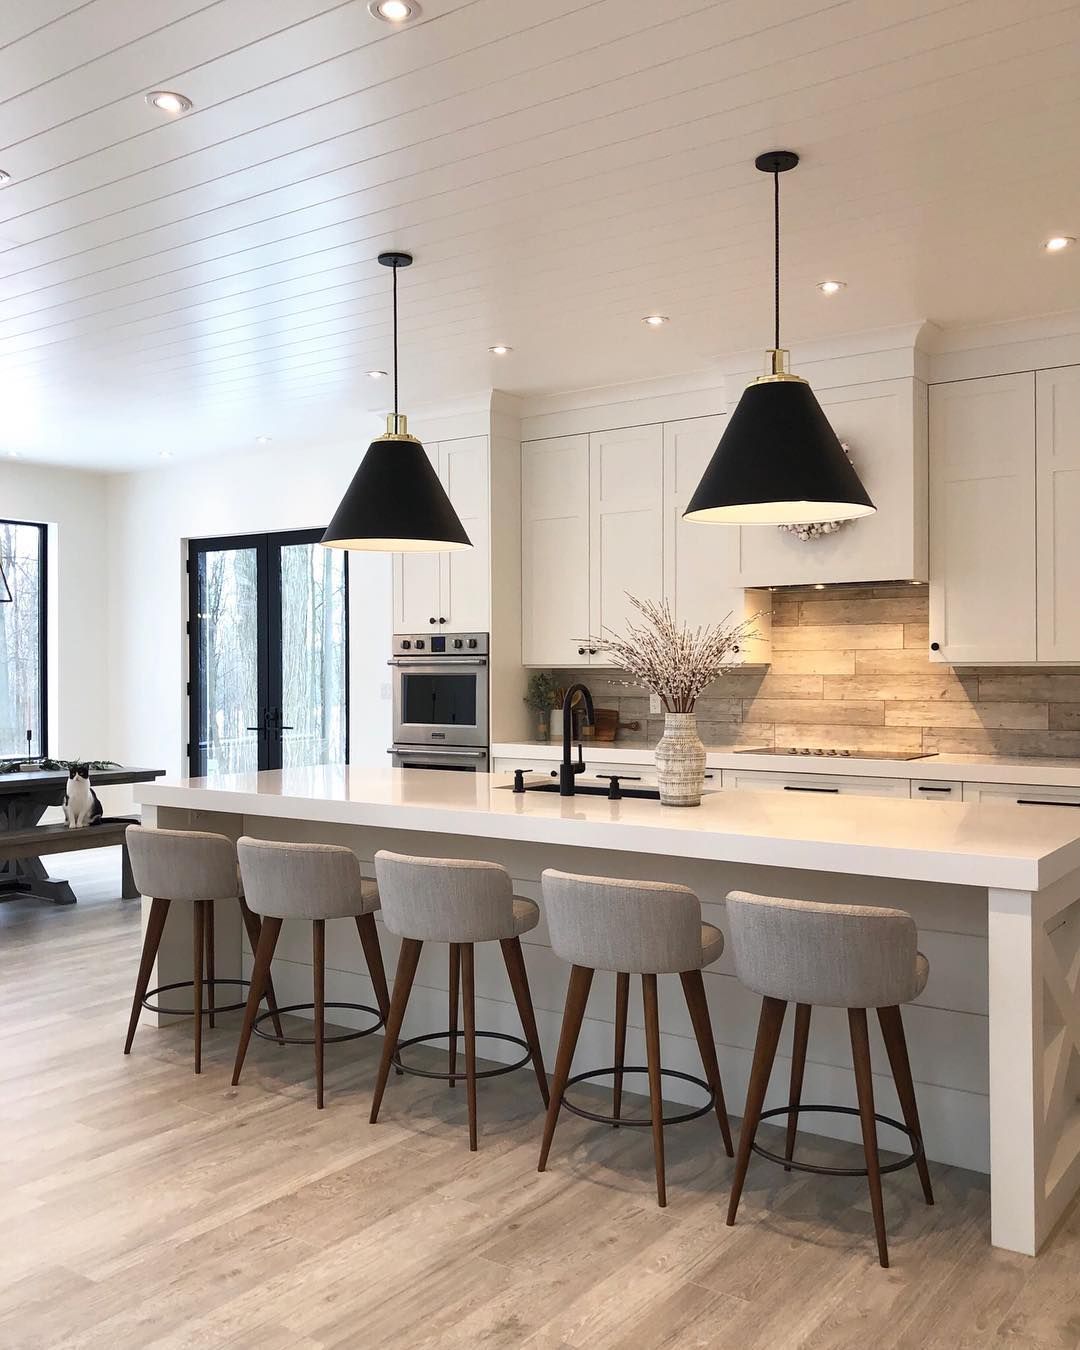 A House We Built on Instagram: “The very first furniture pieces we added to our home were these kitchen island barstools and we actually had them ordered during…”